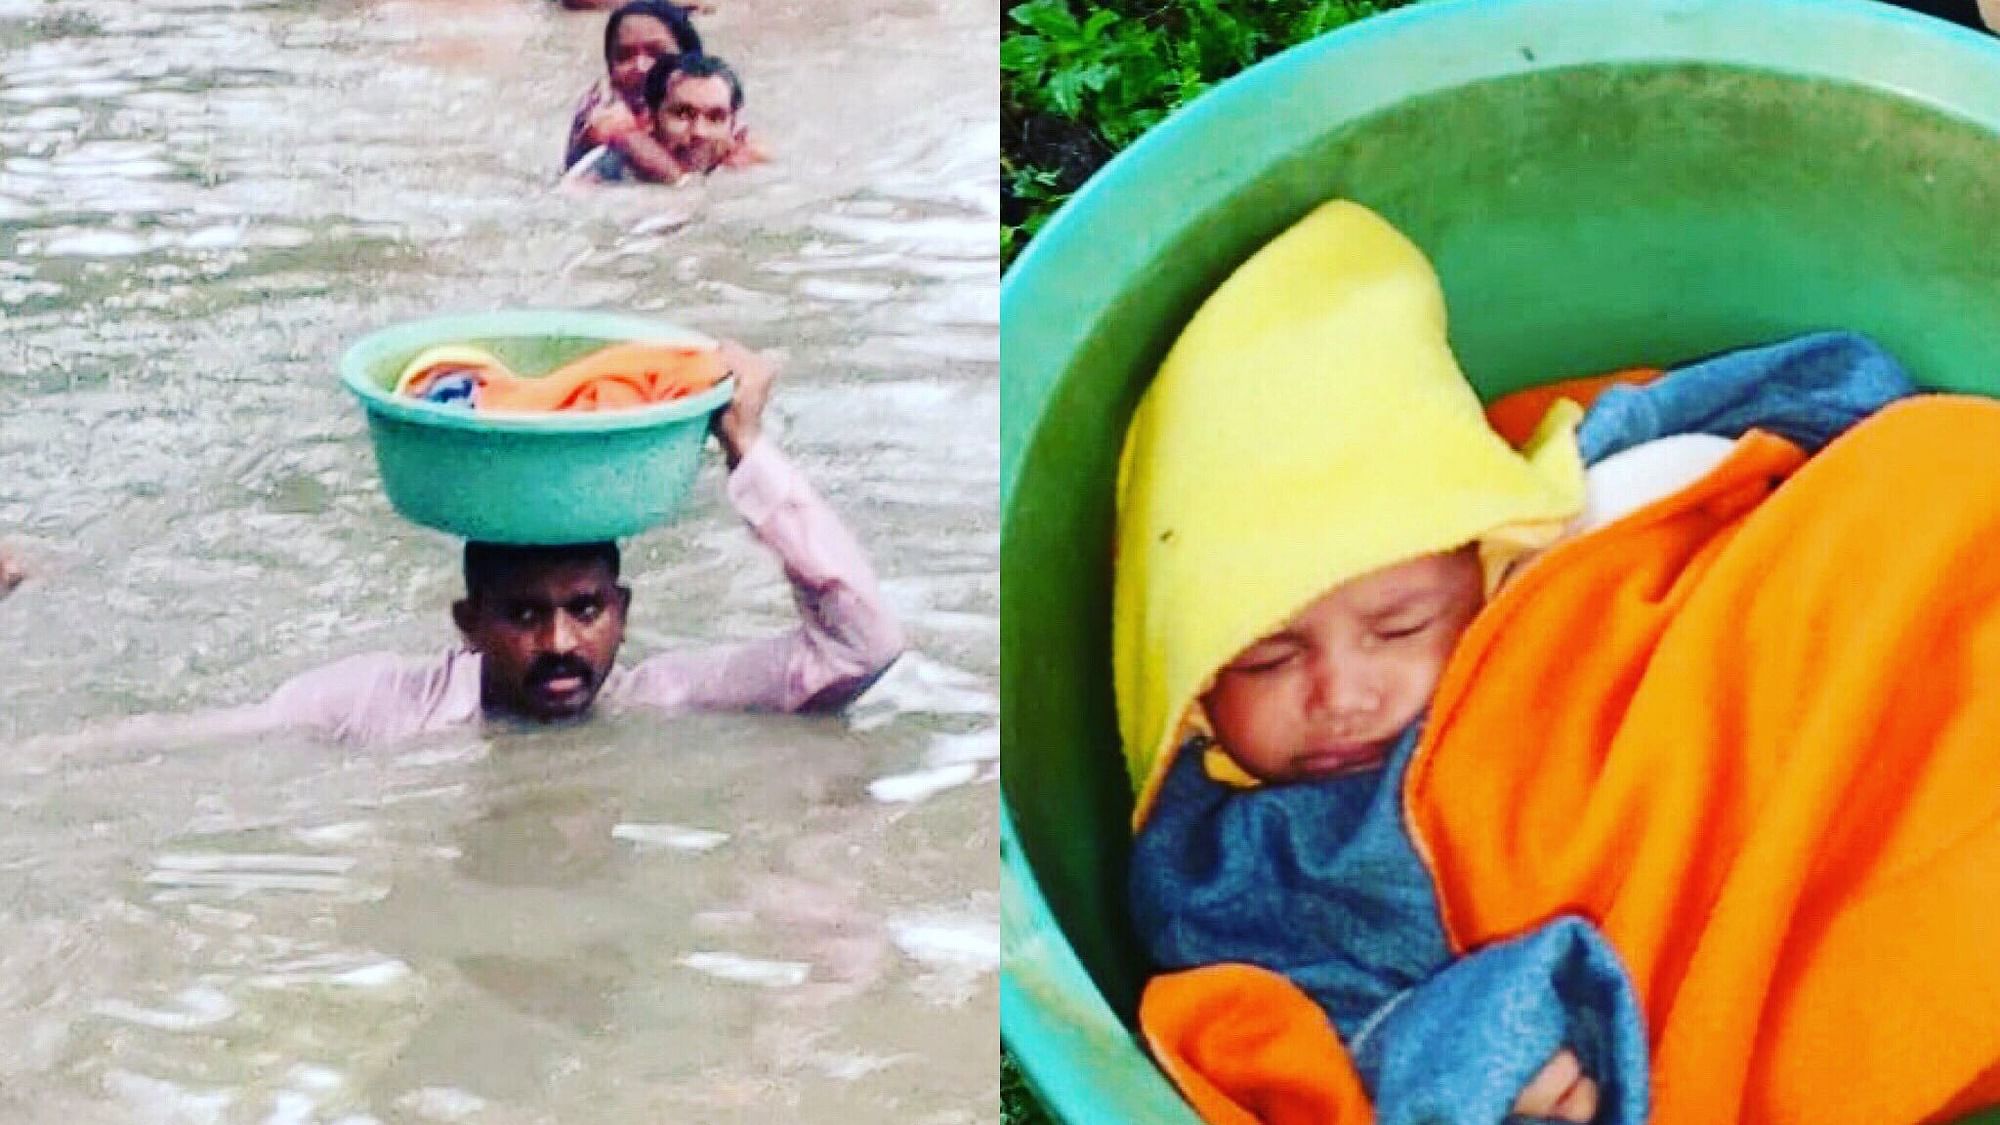 This cop in Vadodara is being hailed as a hero after a video of him rescuing a 45-day-old baby in a tub went viral on social media.